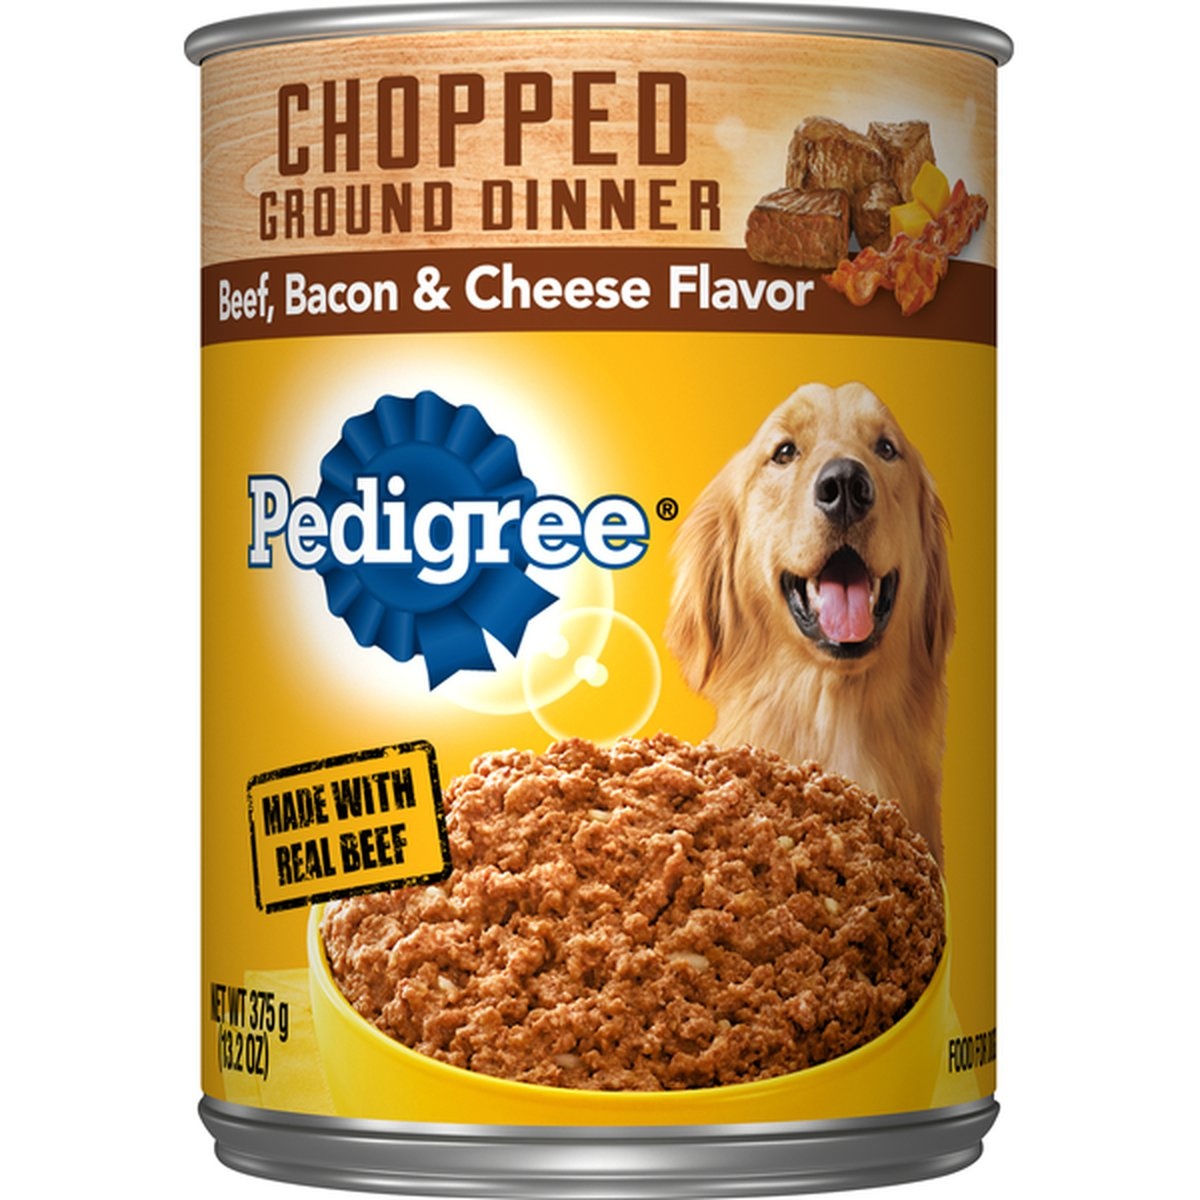 slide 1 of 1, Pedigree Dog Food, Beef, Bacon & Cheese Flavor, Chopped Ground Dinner, 13.2 oz